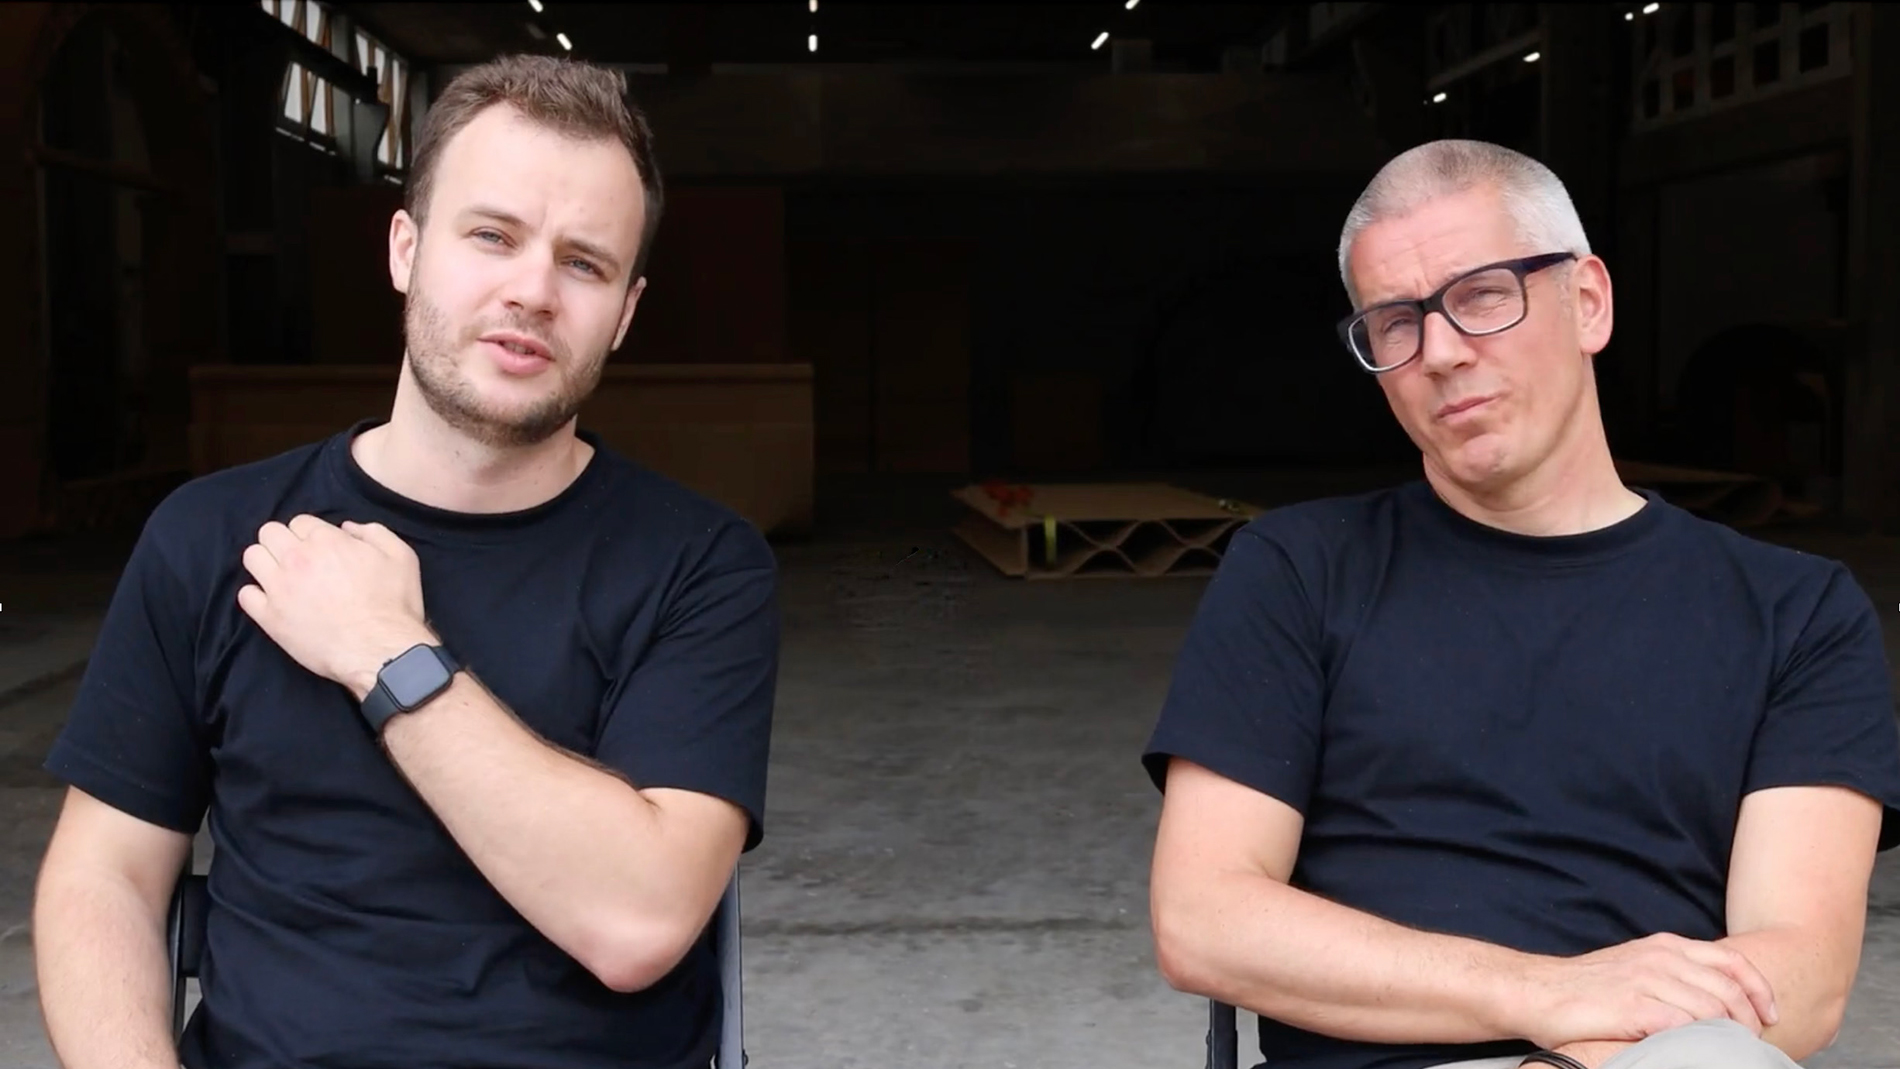 Matúš Uríček and Morten Bove want to make building more sustainable. Images: WOHN